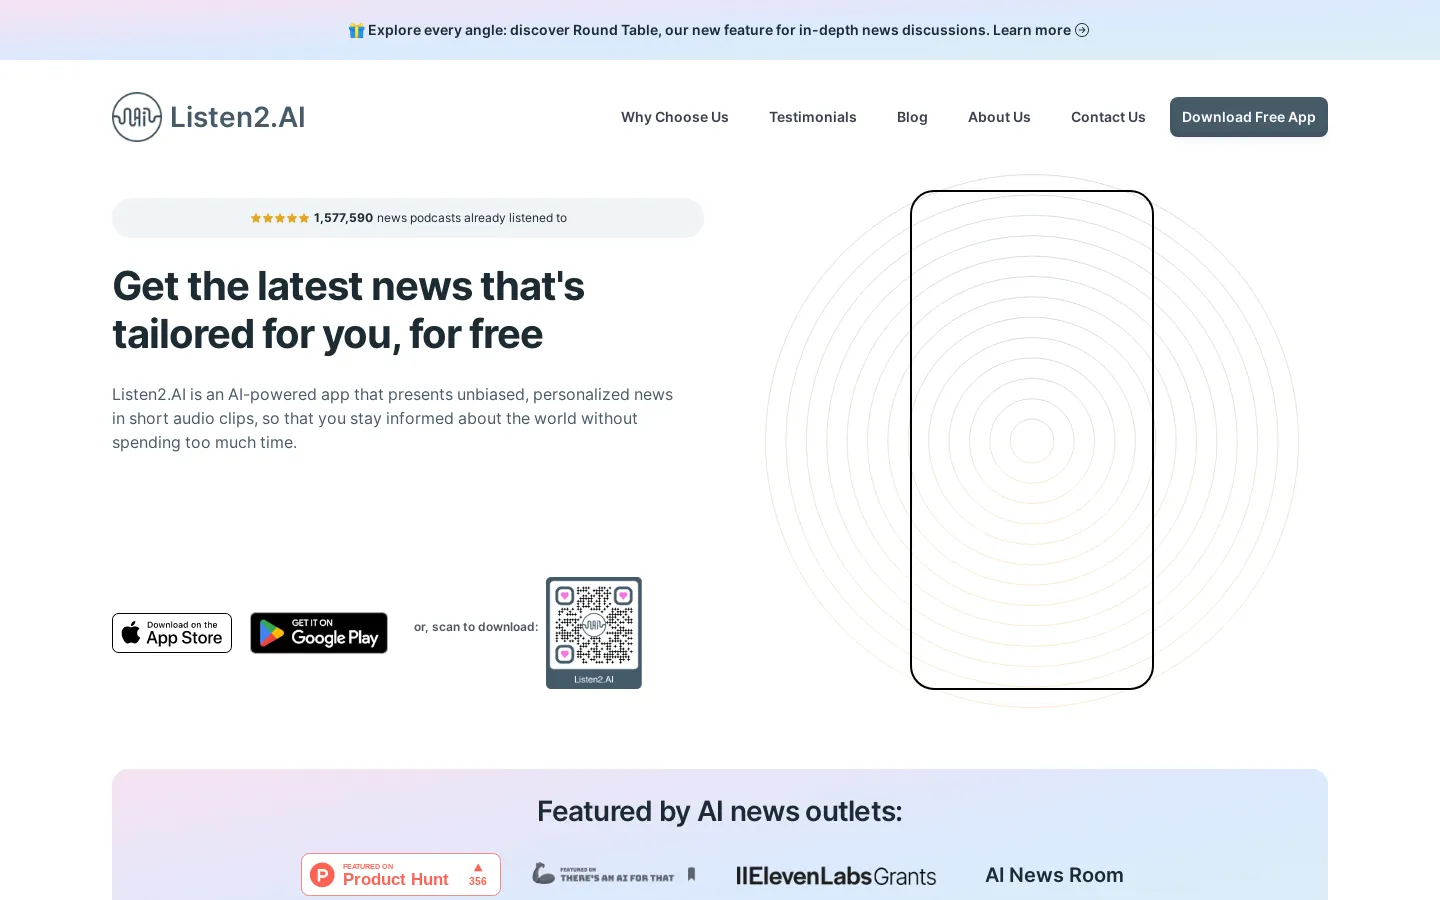 Credible Real-time News, Tailored Just For You